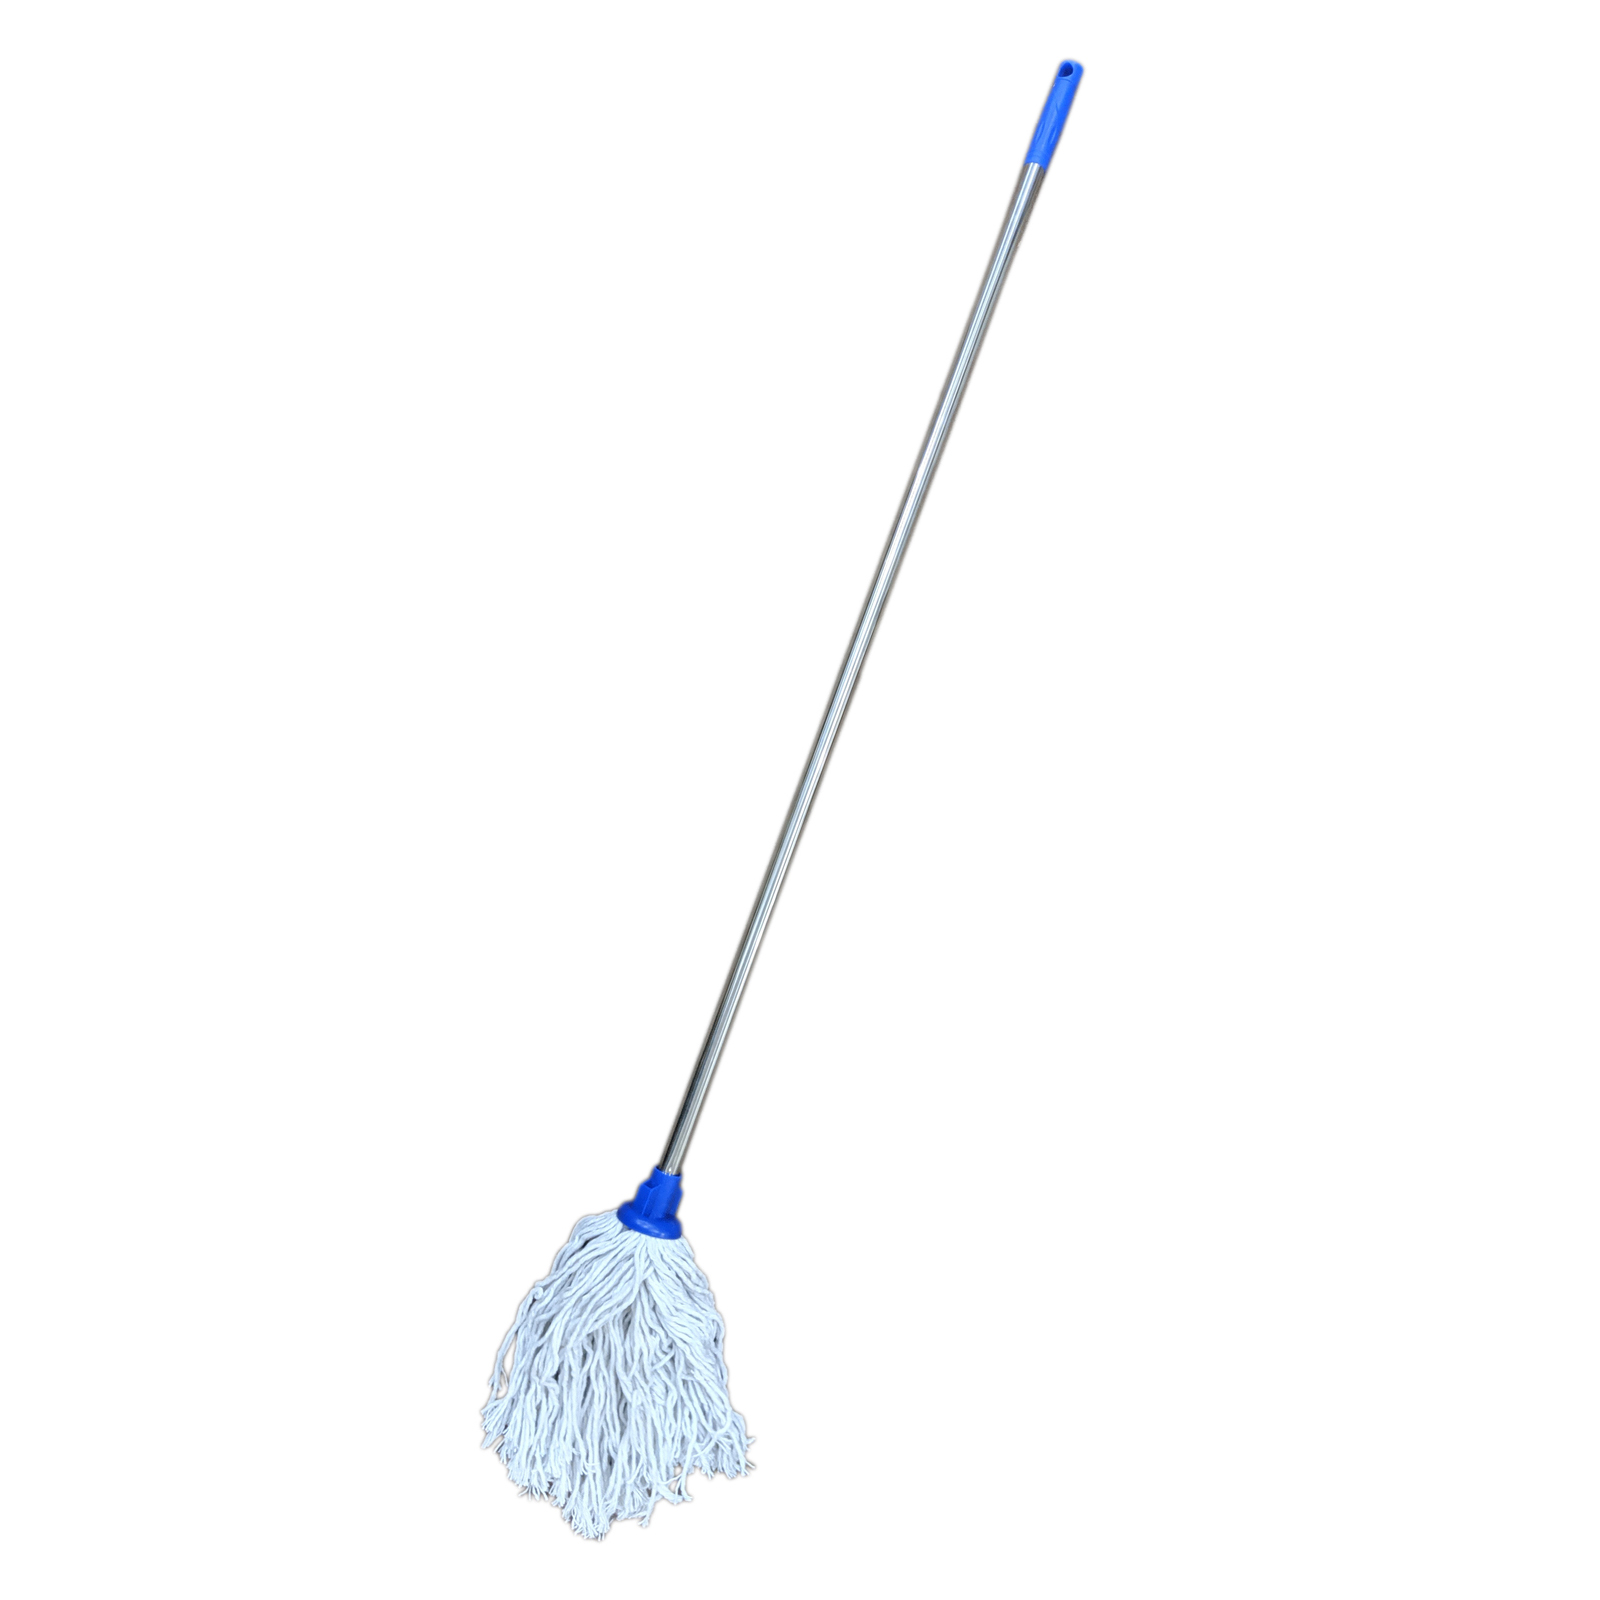 Amark Full Cotton Mop 300g with Stainless Steel Handle